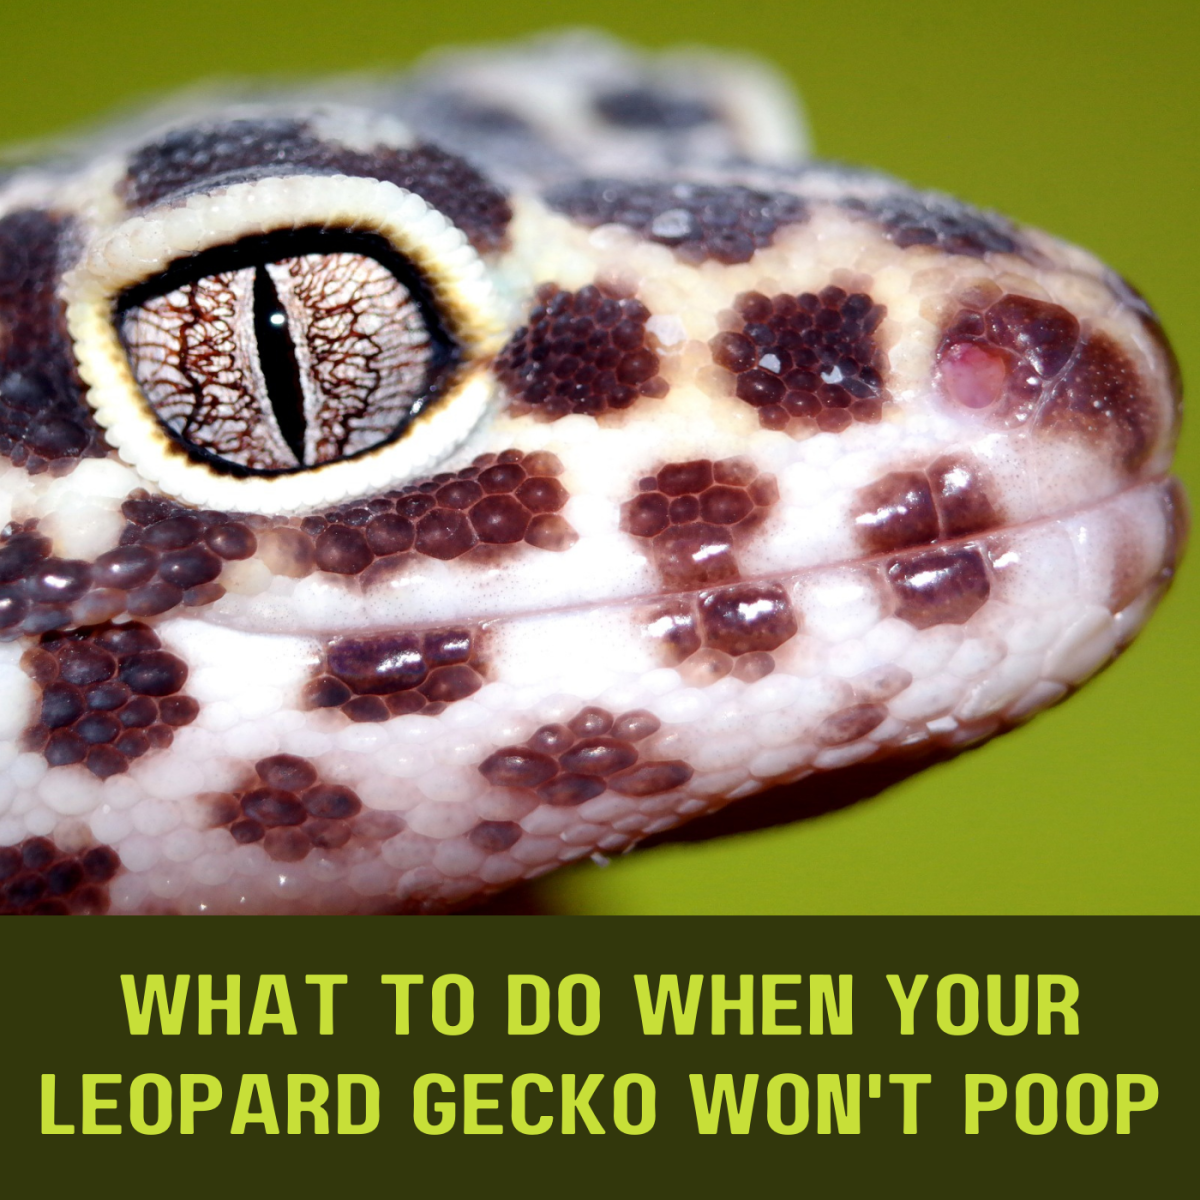 Discover some of the possible reasons behind your gecko's lack of bowel movement, as well as what to do about it.